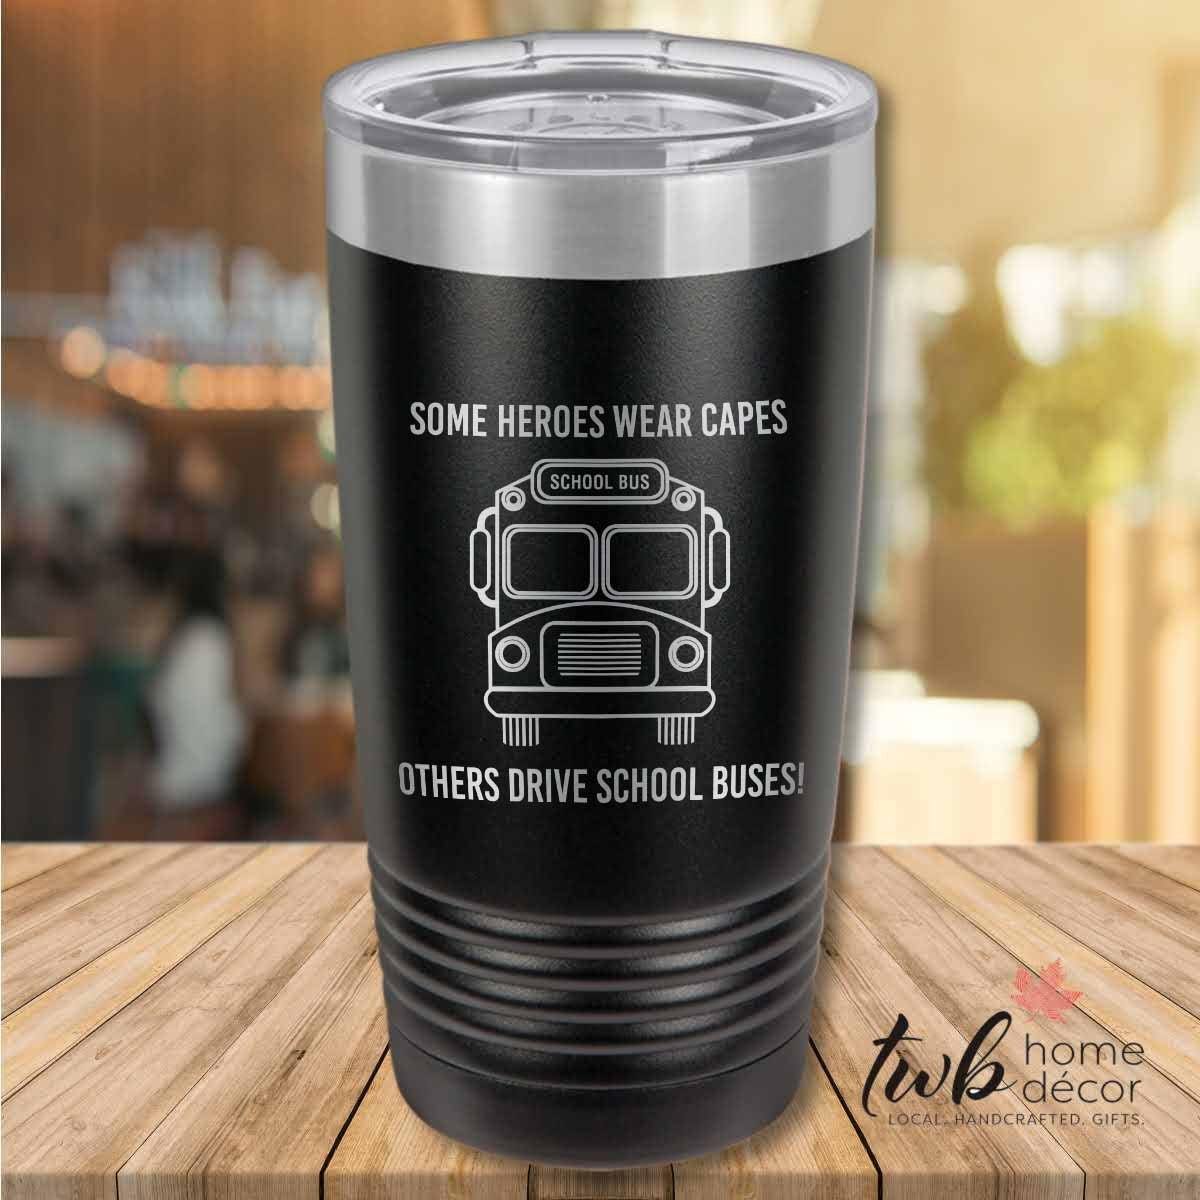 Some Heroes Wear Capes Thermal - TWB Home Decor